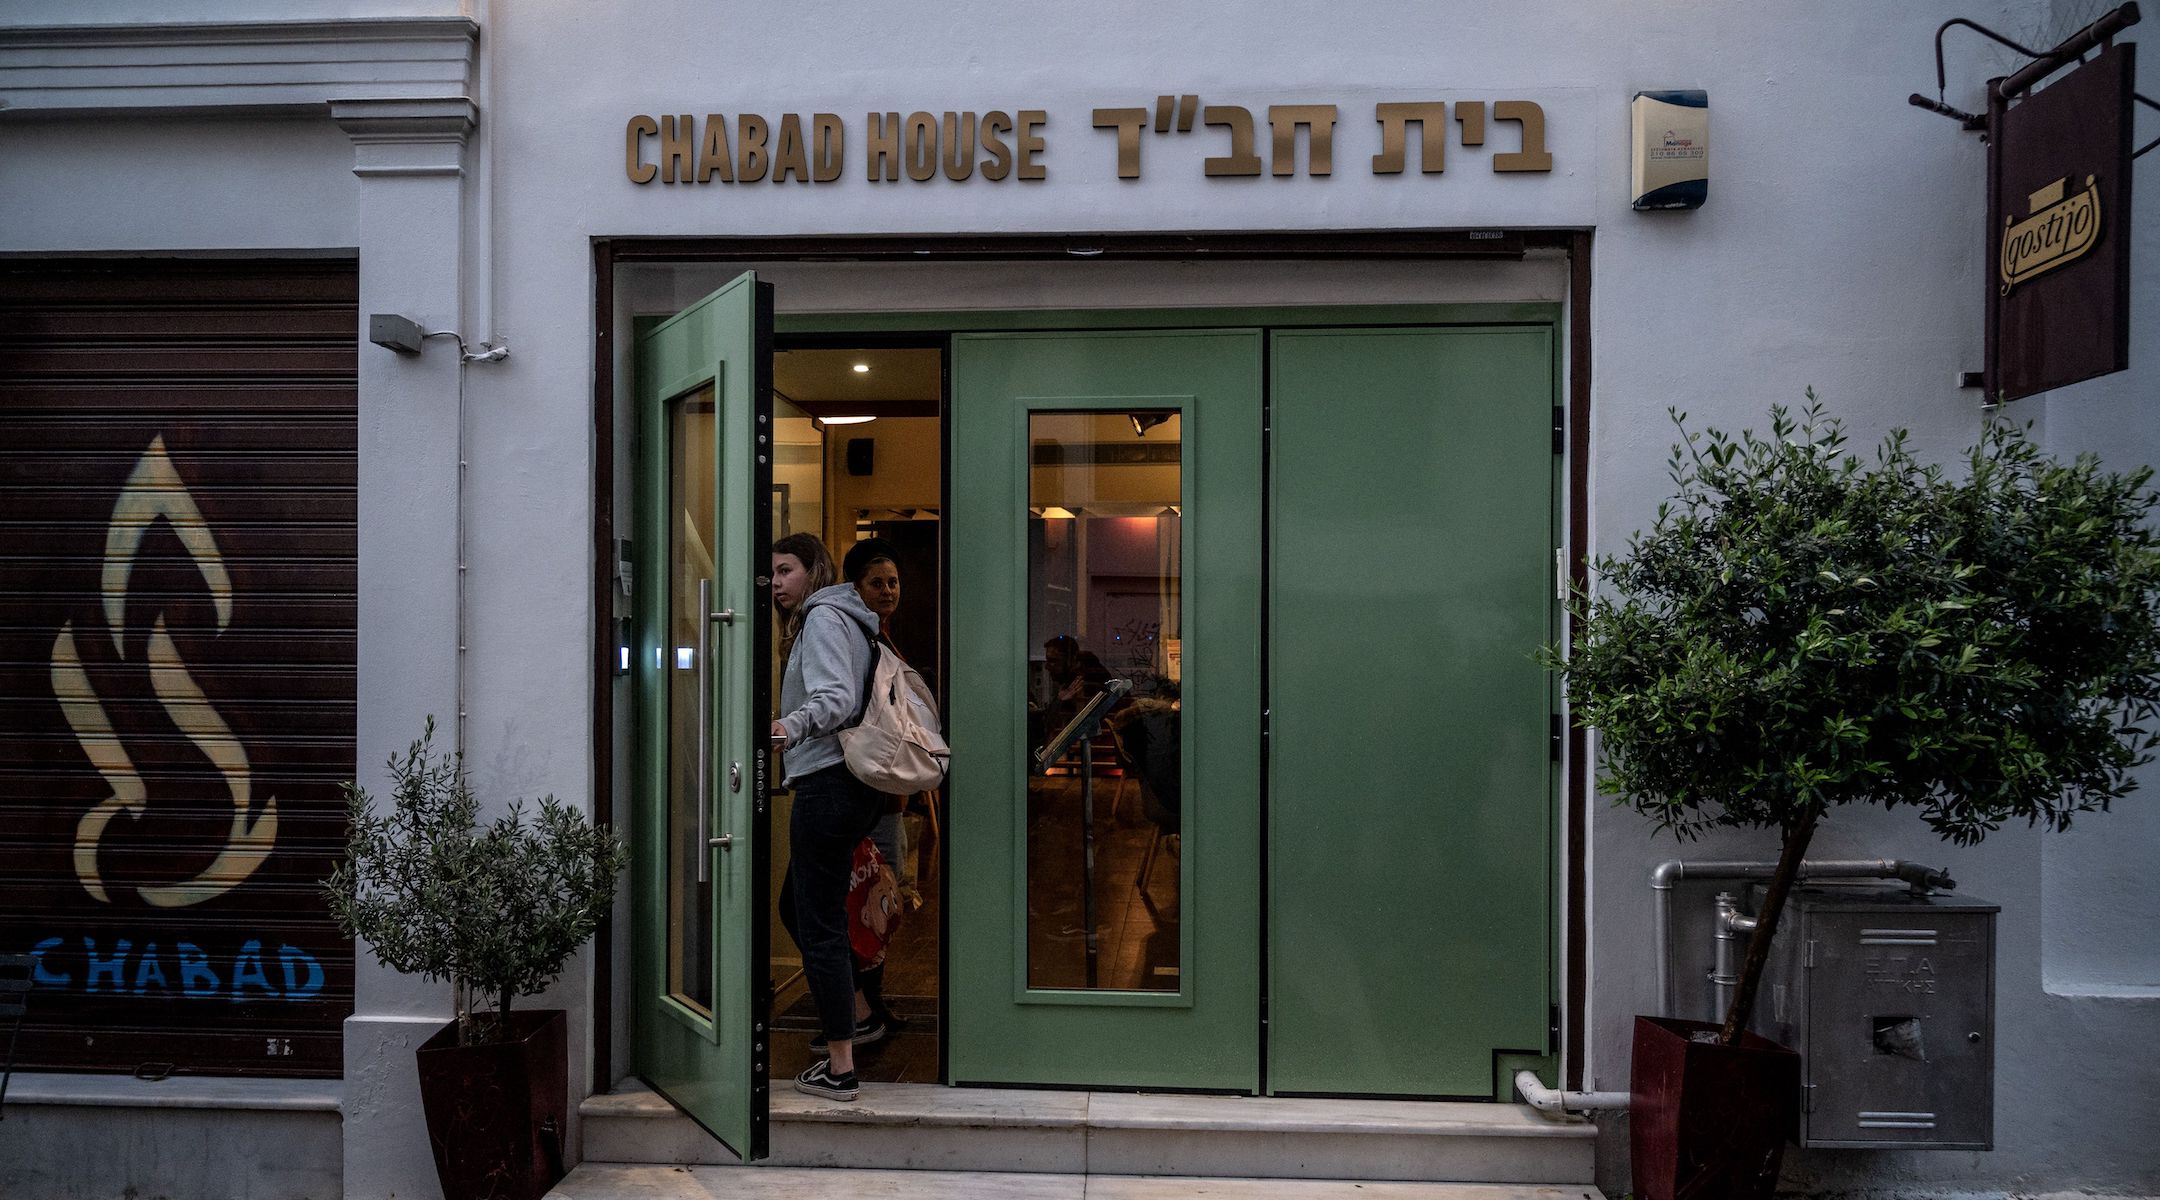 Women enter a Jewish restaurant in central Athens, March 28, 2023. Greek police sources said they arrested two men who targeted the building. (Angelos Tzortzinis/AFP via Getty Images)